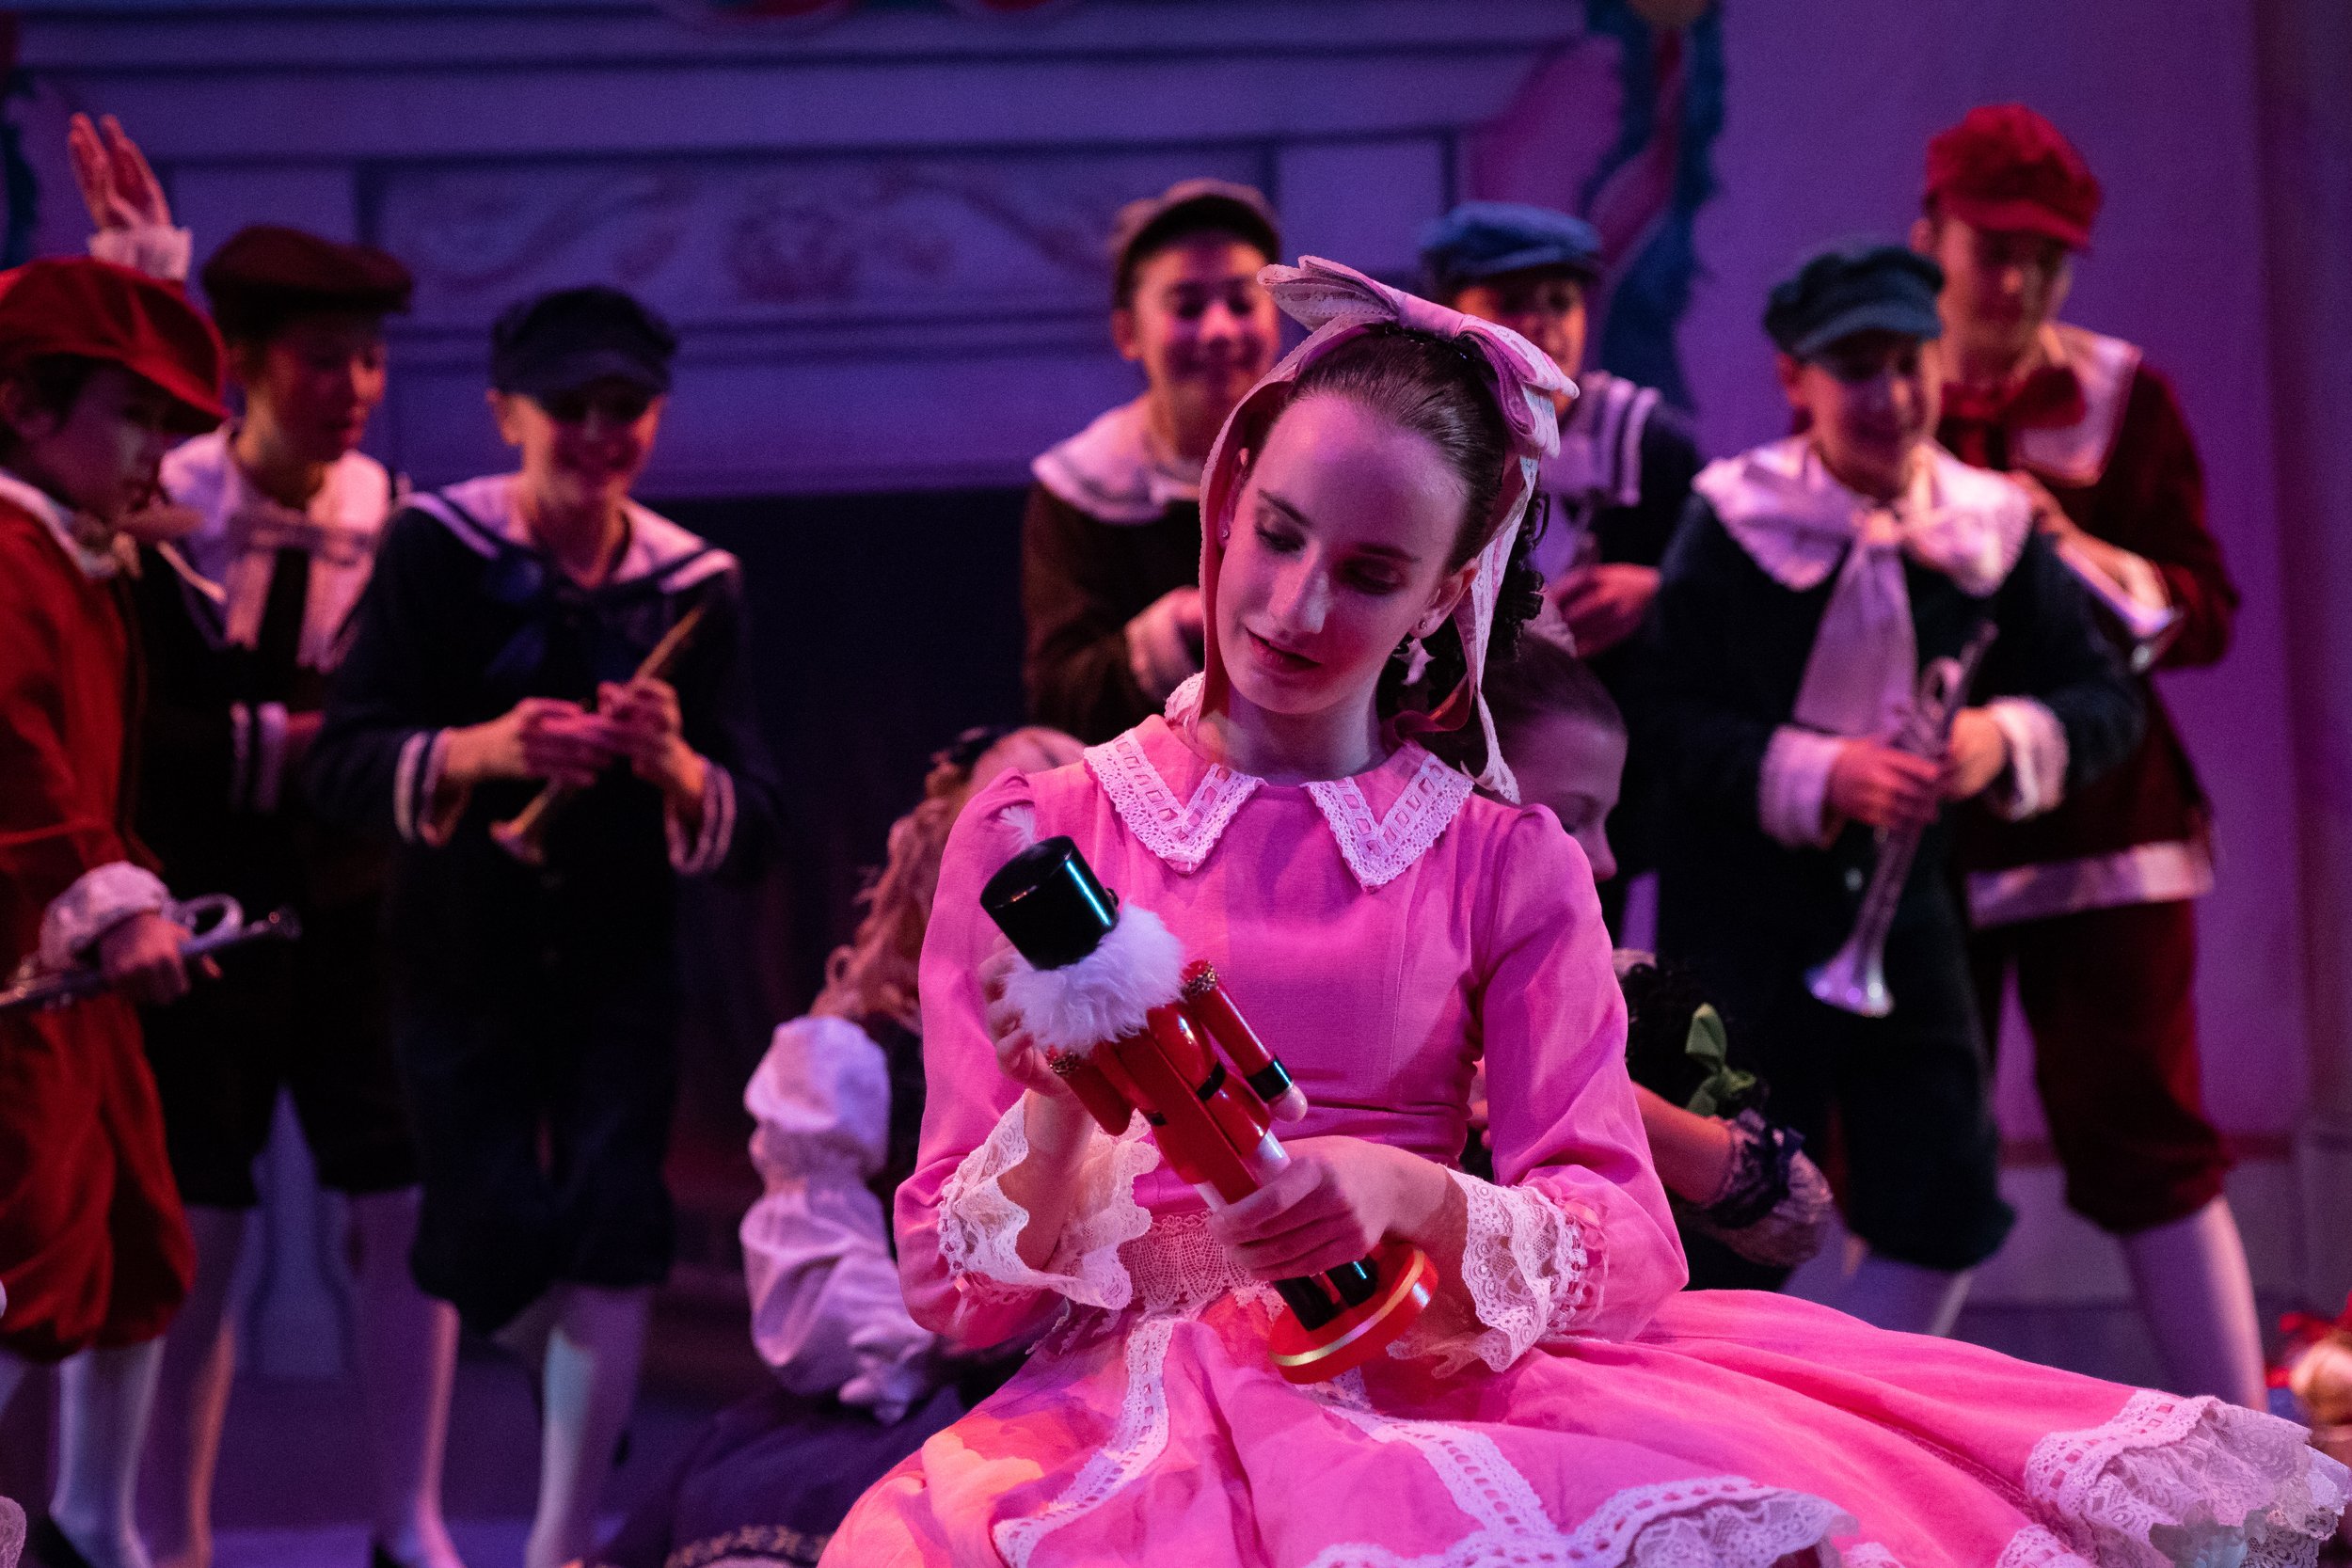  Sophie Wilson as Clara clutching her toy nutcracker during the party in the first act, second scene of The Nutcracker performed by Westside Ballet of Santa Monica at the The Broad Stage in Santa Monica, Calif. on Sunday, Dec. 4, 2022. (Caylo Seals |